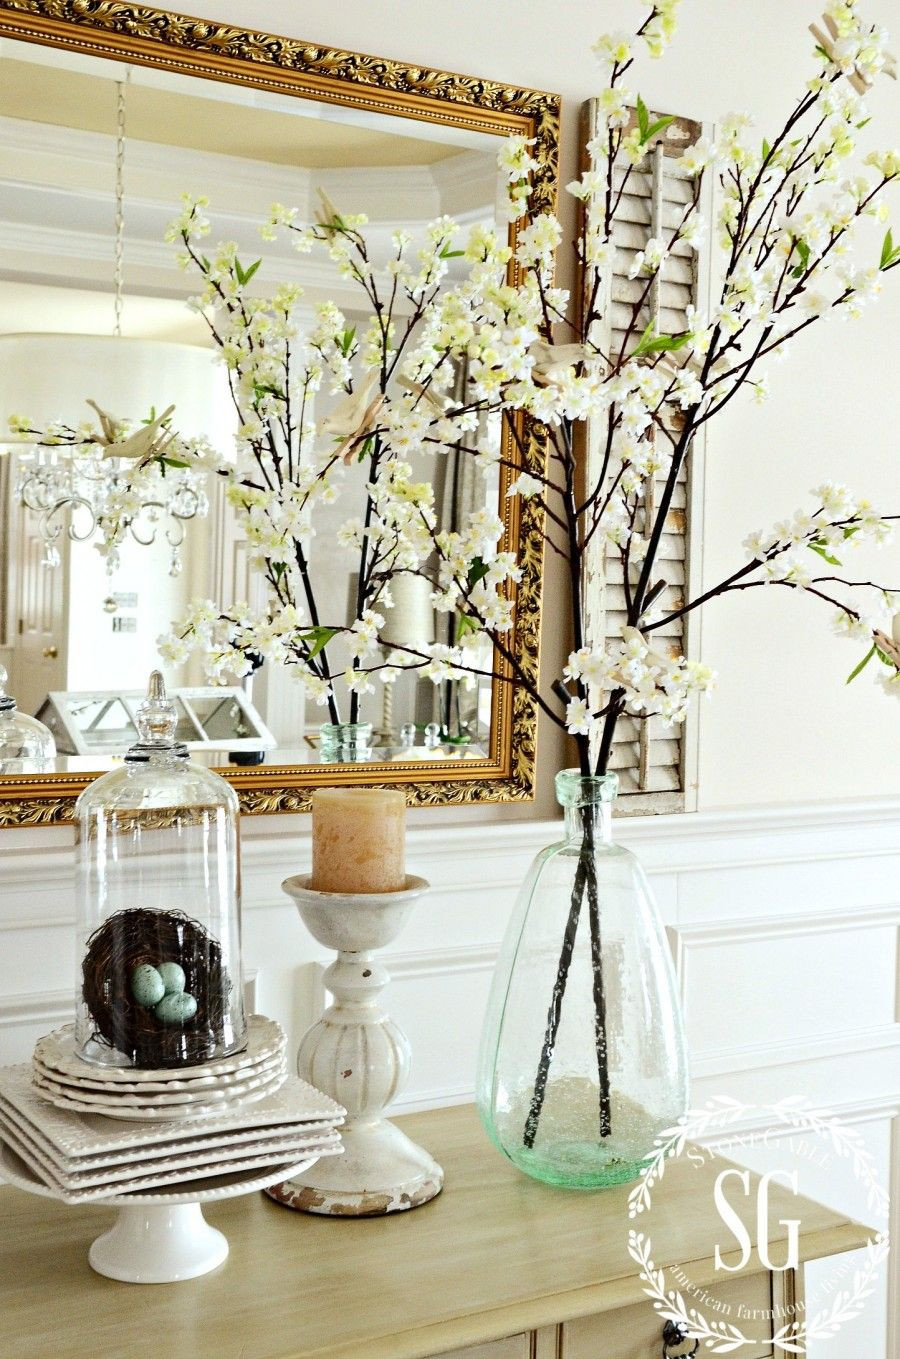 marshalls home goods vases of 6 tips for decorating with neutrals decorating 101 home interior with 6 tips for decorating with neutrals decorating 101 vary sizes